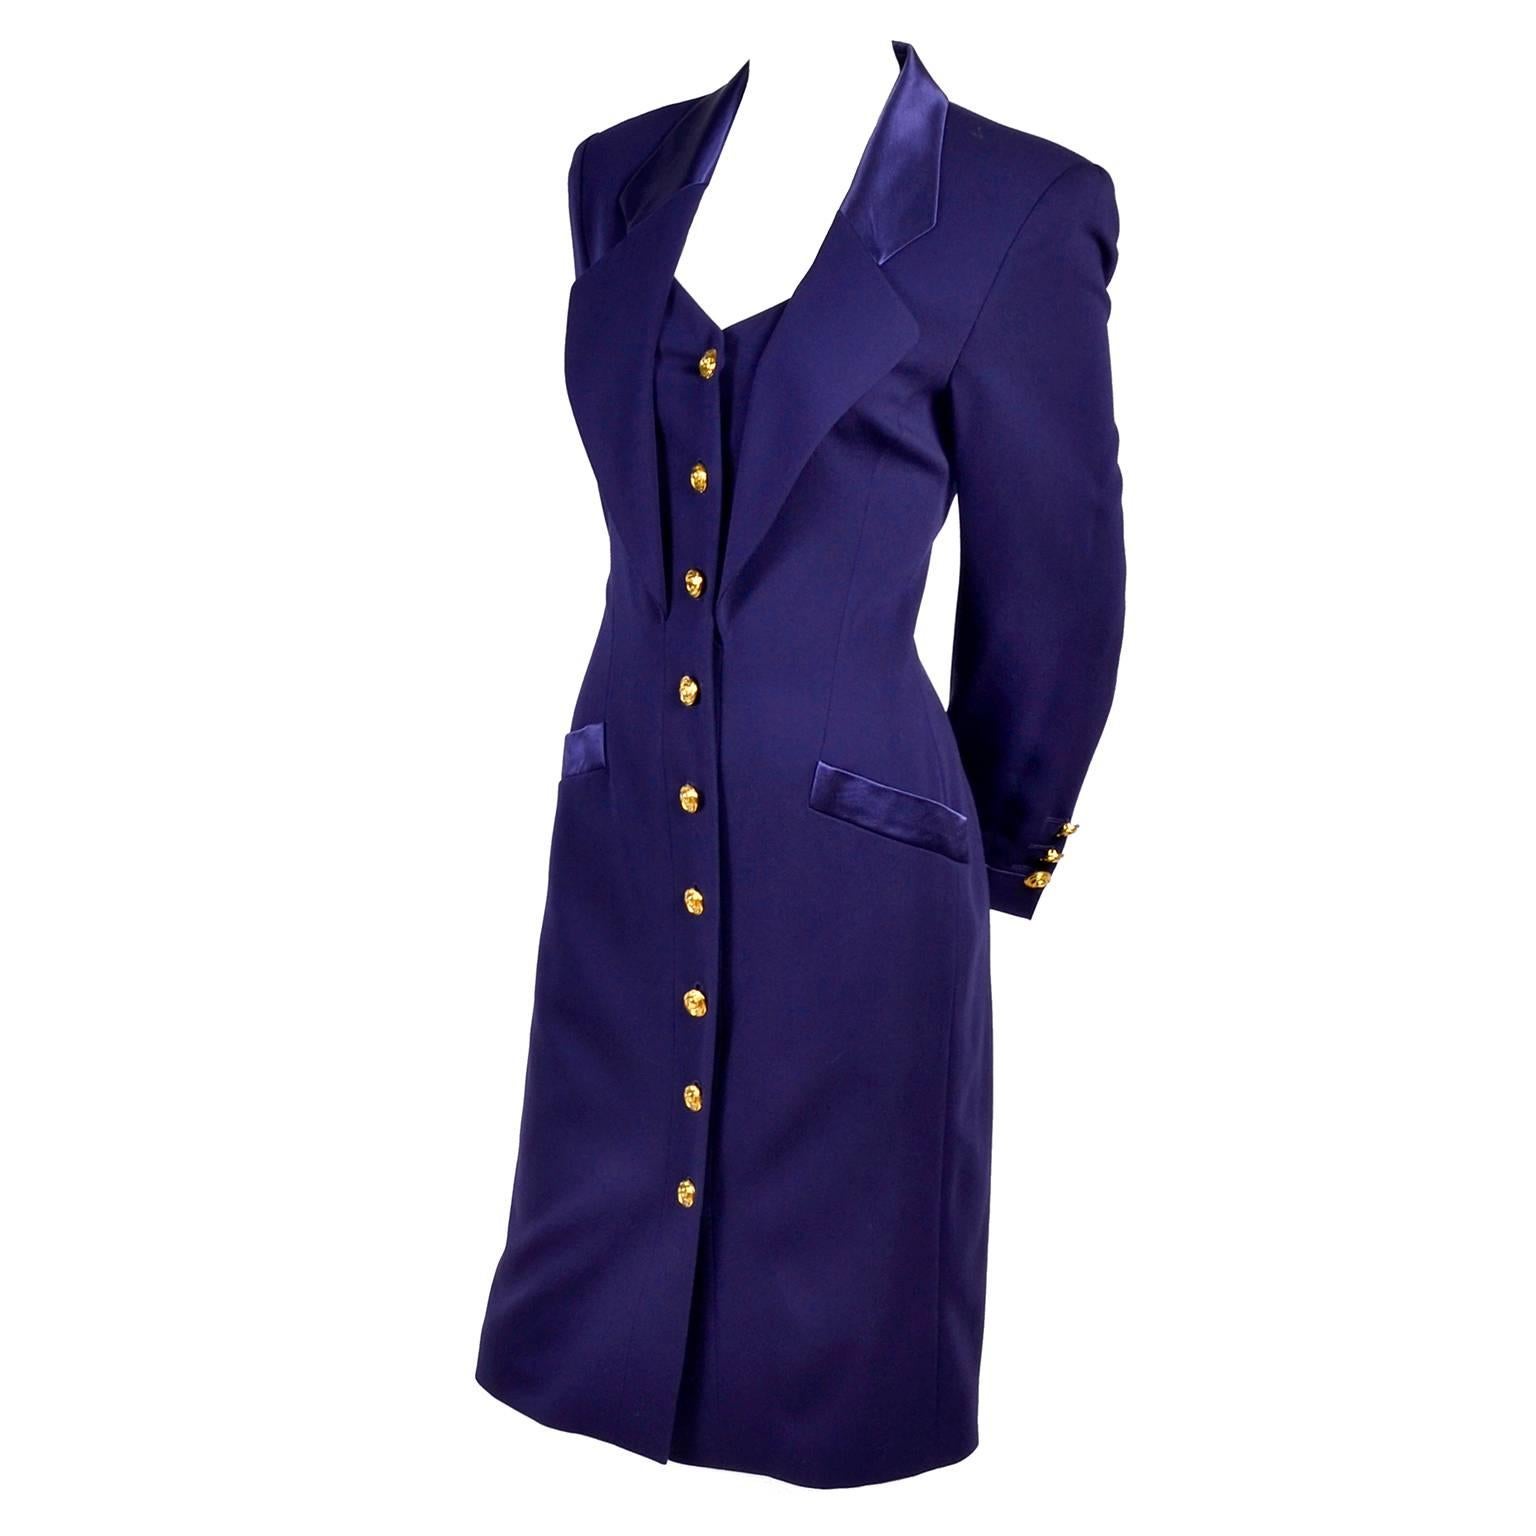 This is a stunning dead stock 1980's Escada Margaretha Ley purple wool vintage dress with decorative lapels and satin details that give it the look of a tuxedo. Gold swirl buttons down the front, and fully lined in silk. Made in Germany and it still